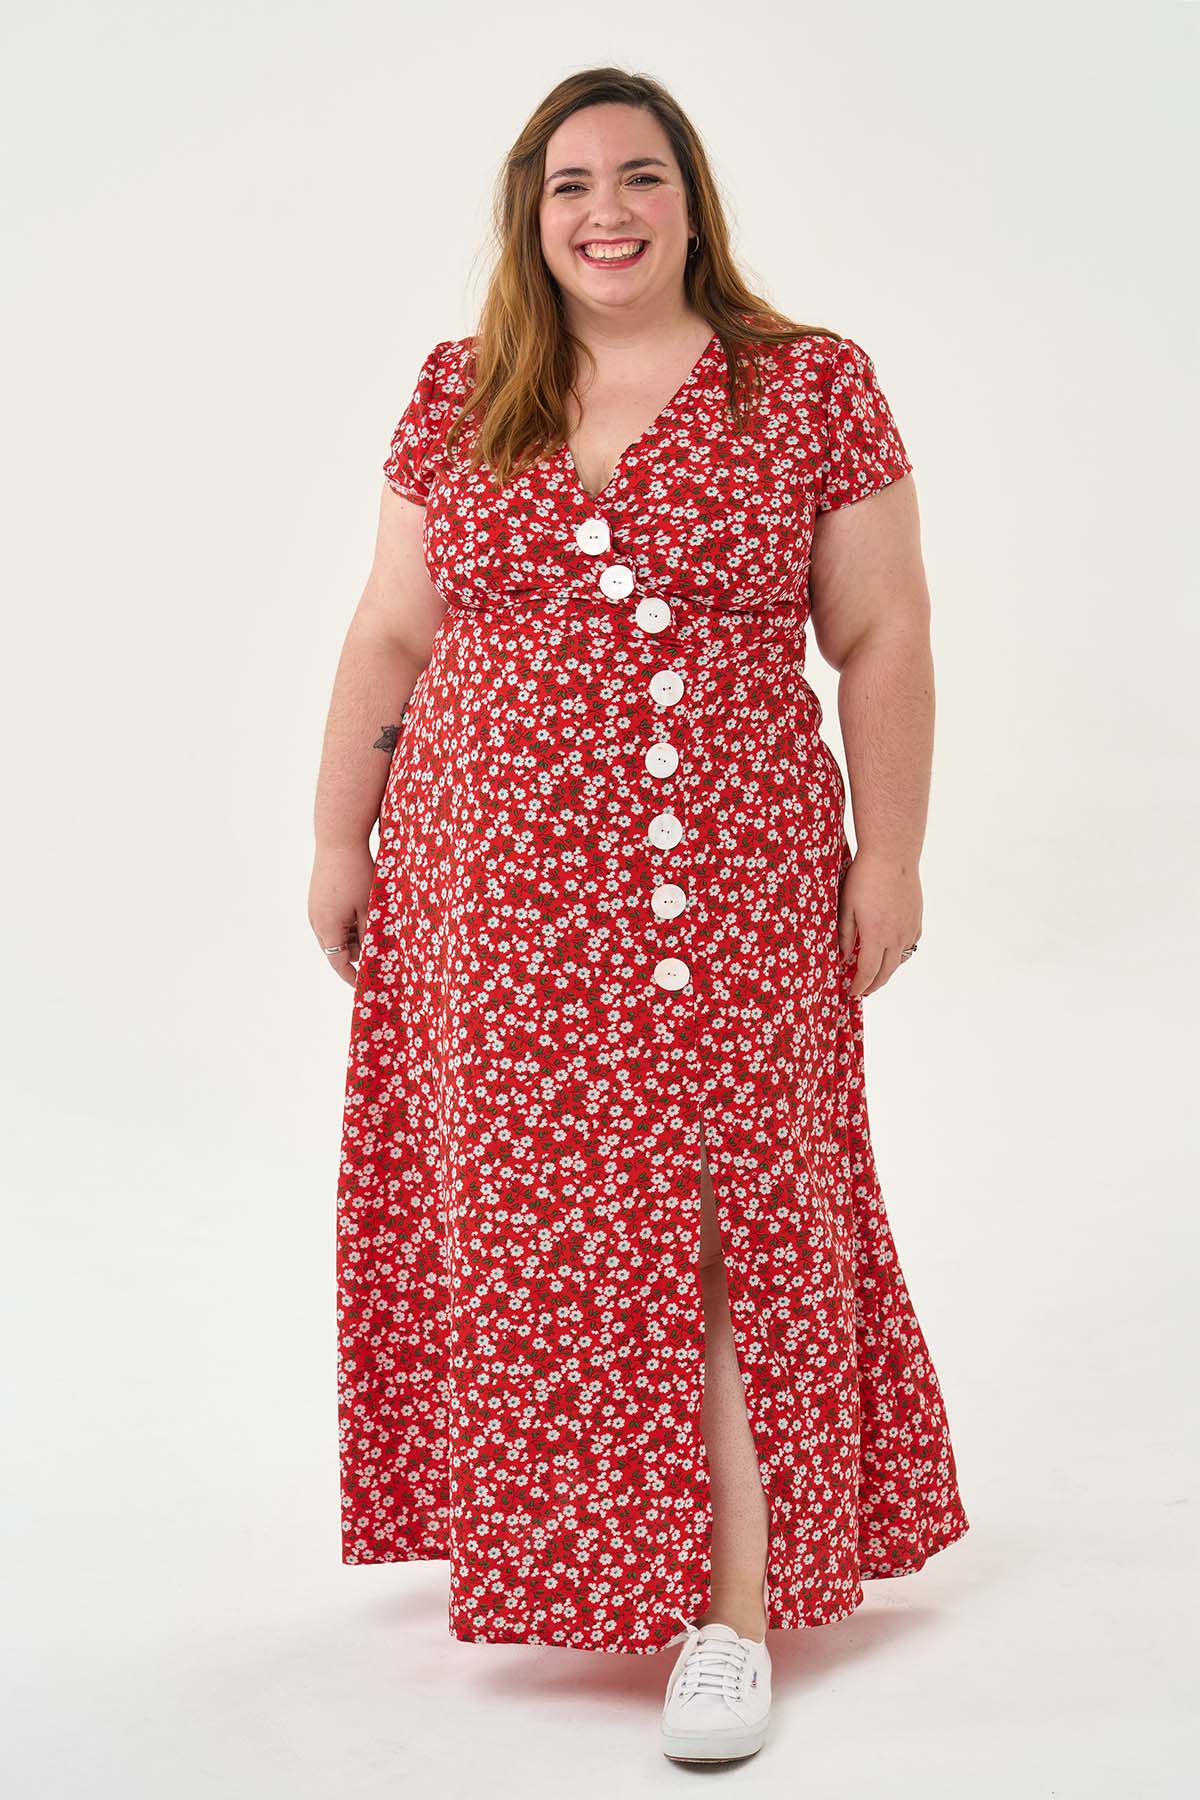 Sew Over It Pippa Dress - The Fold Line